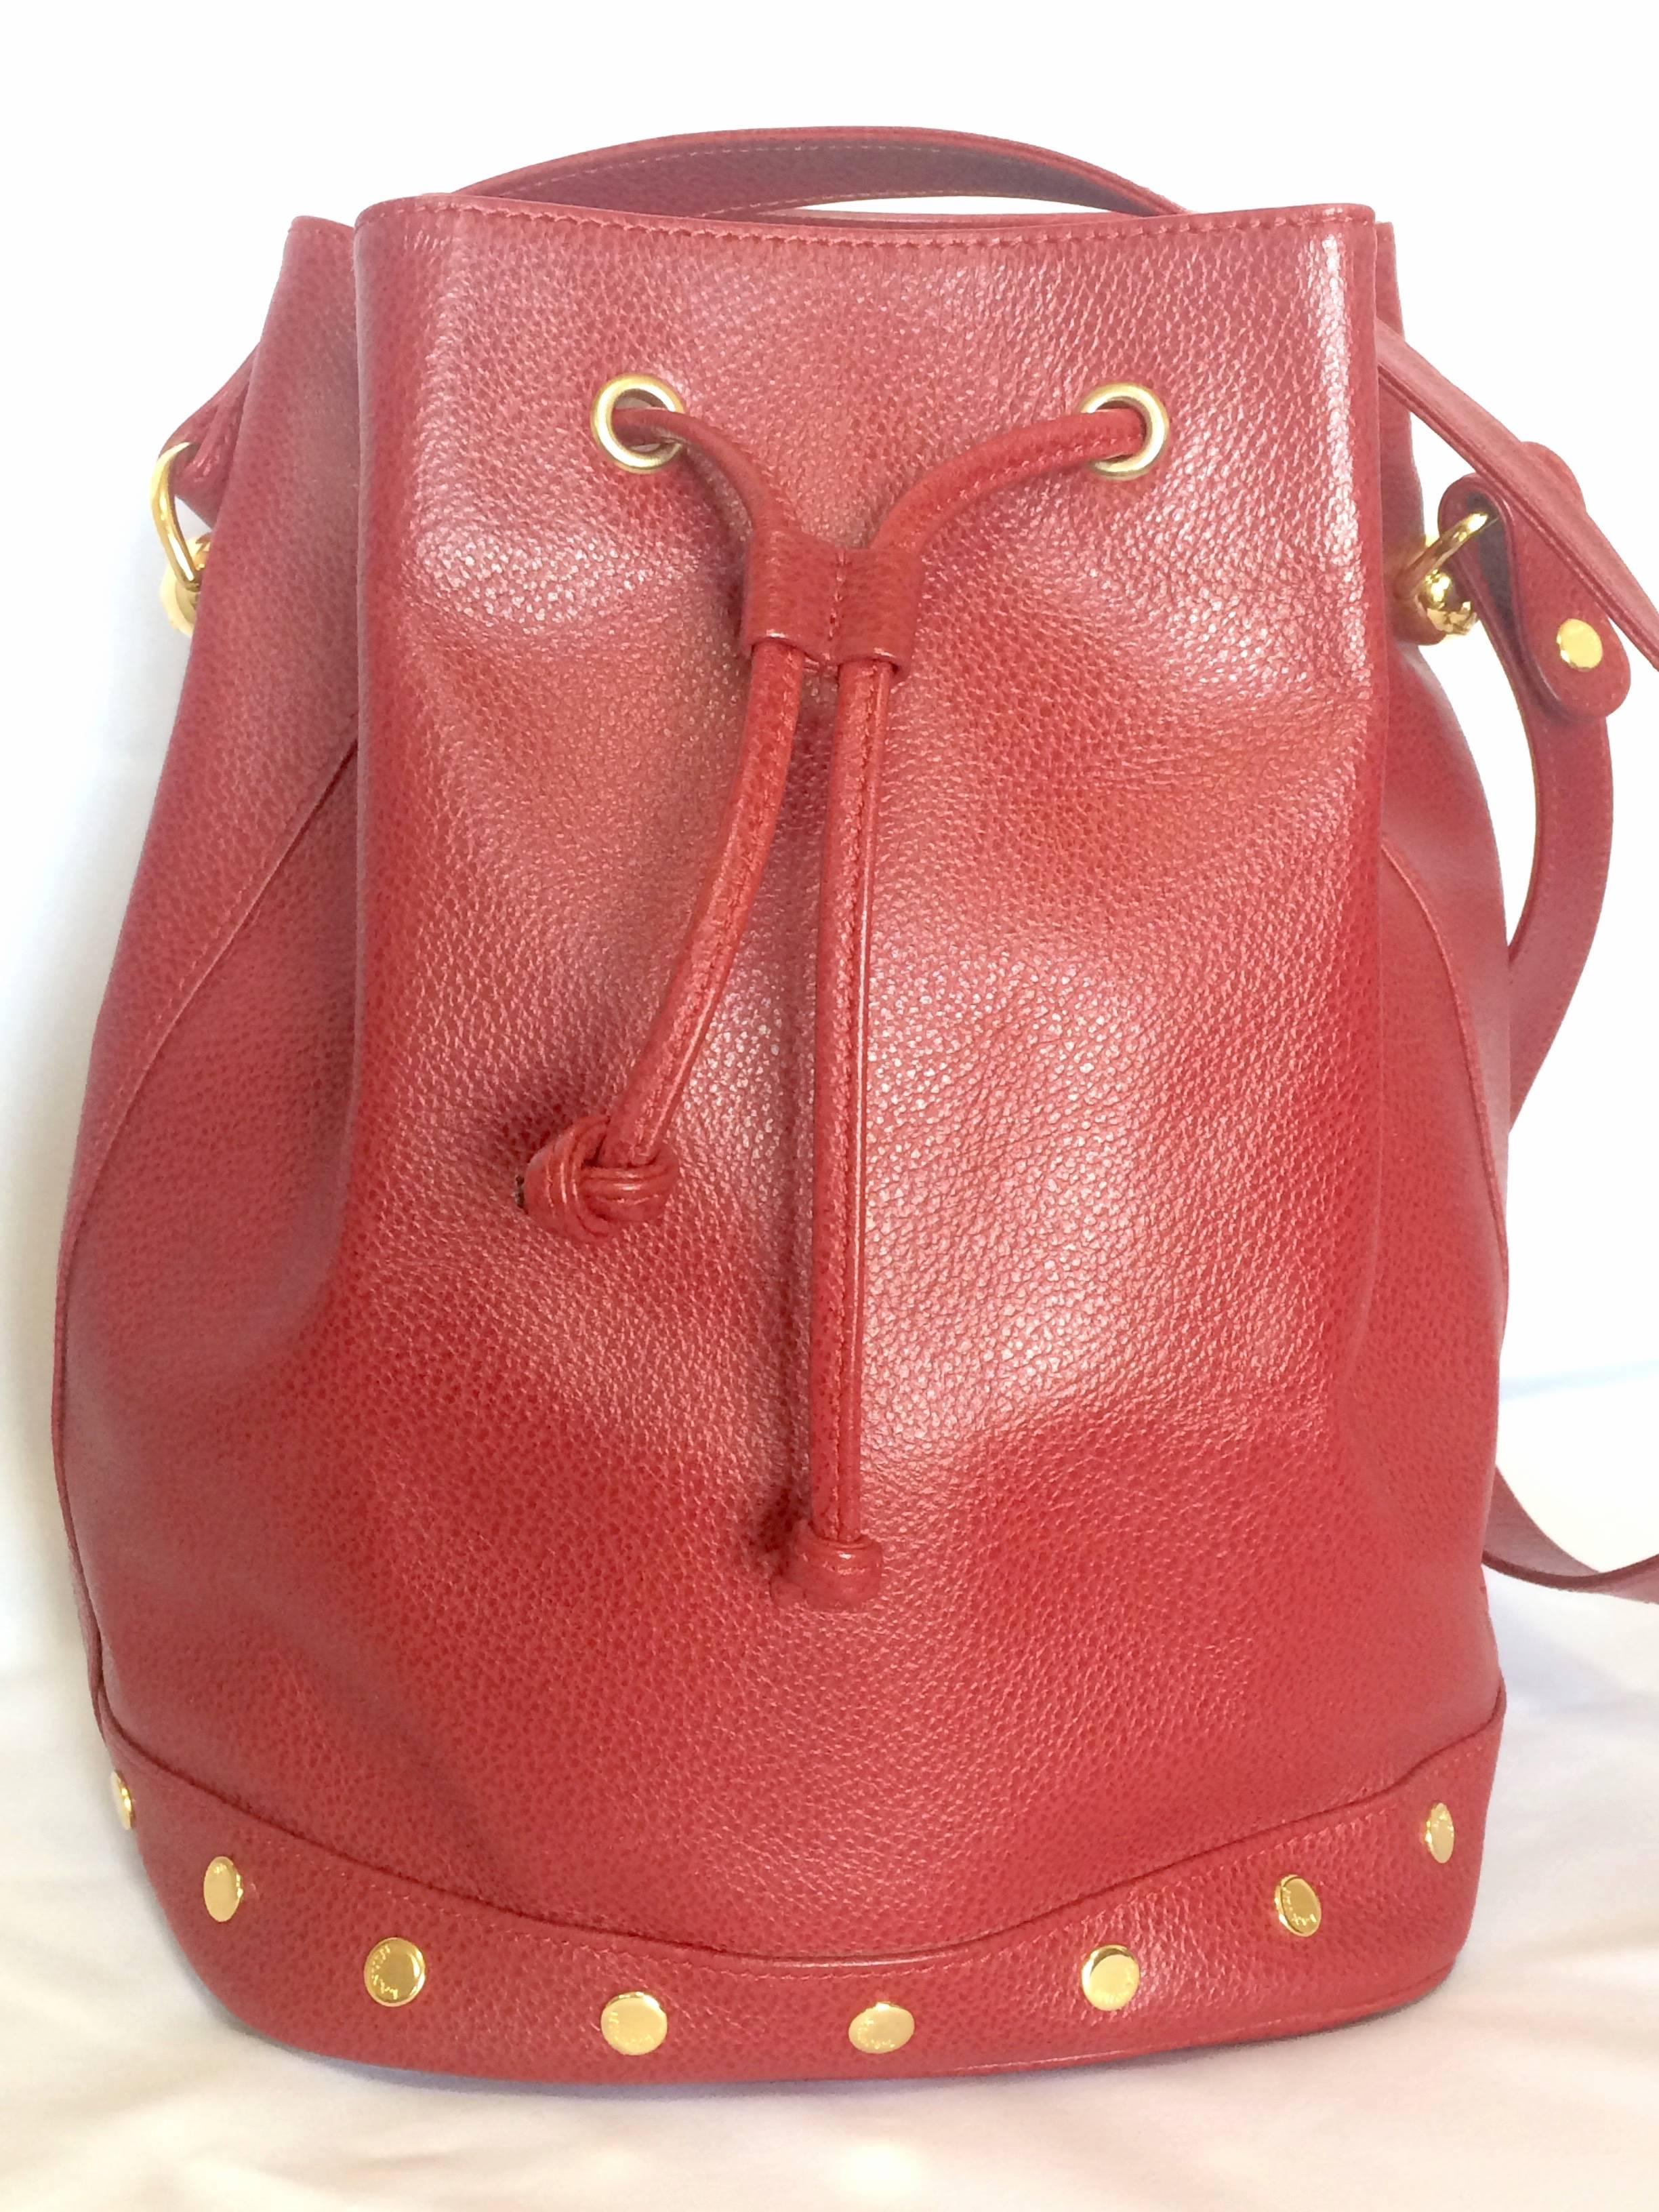 1990s. Vintage LANVIN apricot red hobo bucket shoulder bag with studded logo motifs.

Introducing another beautiful masterpiece shoulder bag from LANVIN back in the 90's.
You will love the beautiful apricot red color grained leather with golden logo